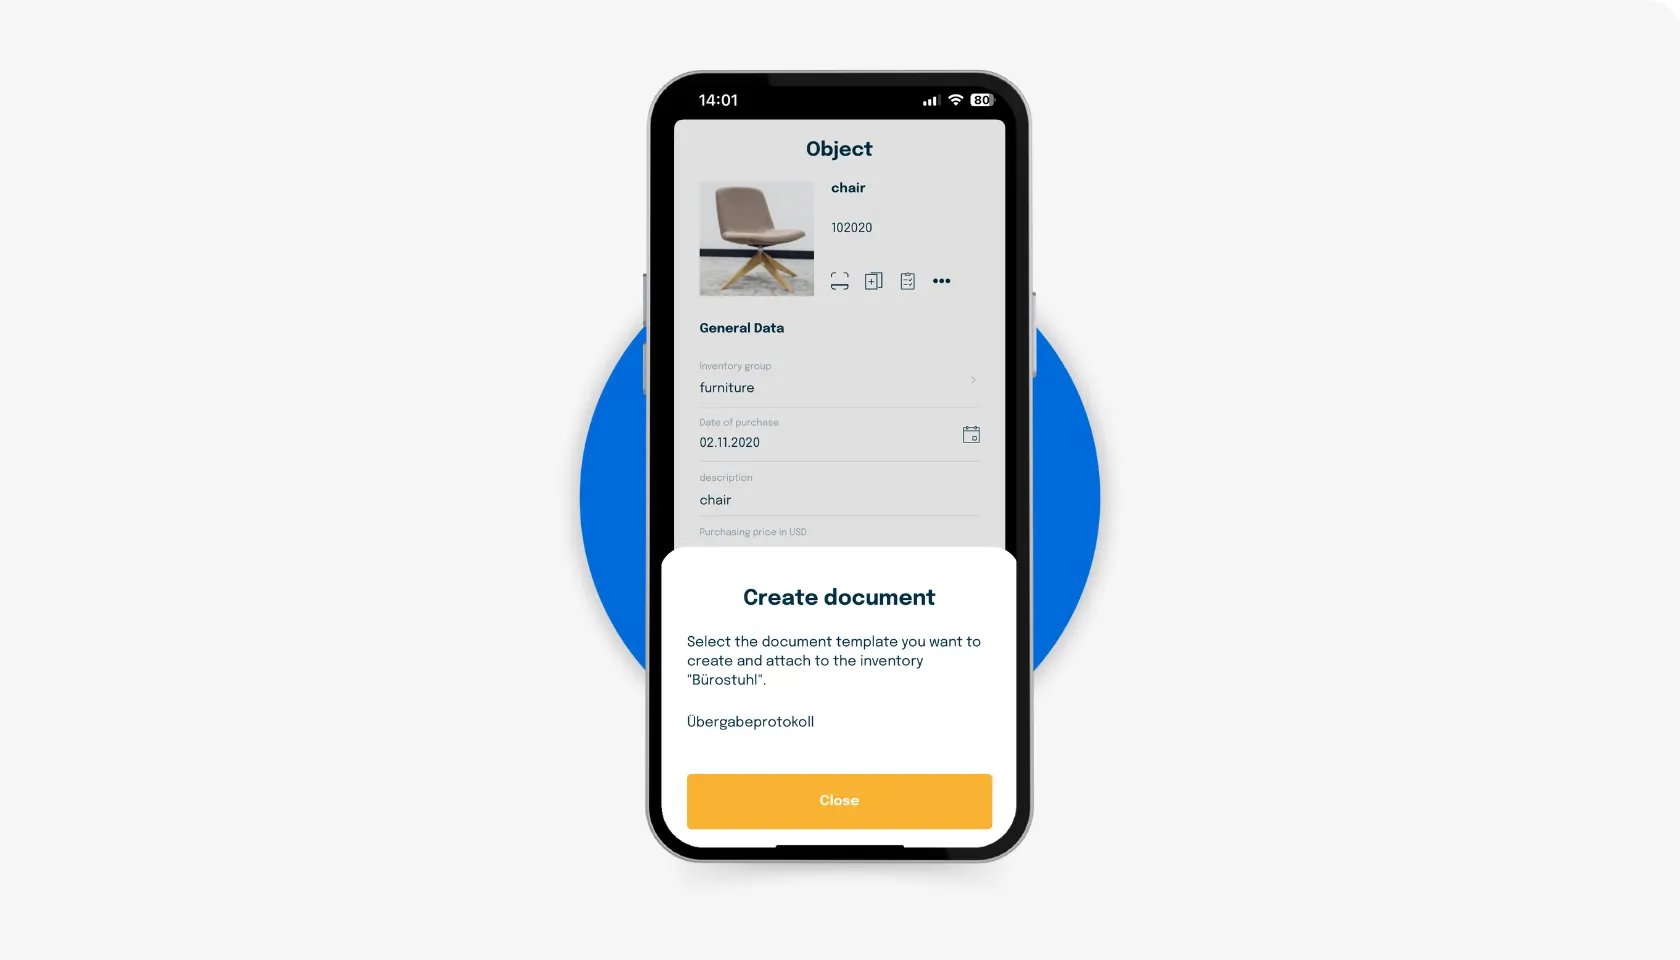 create documents in the seventhings app